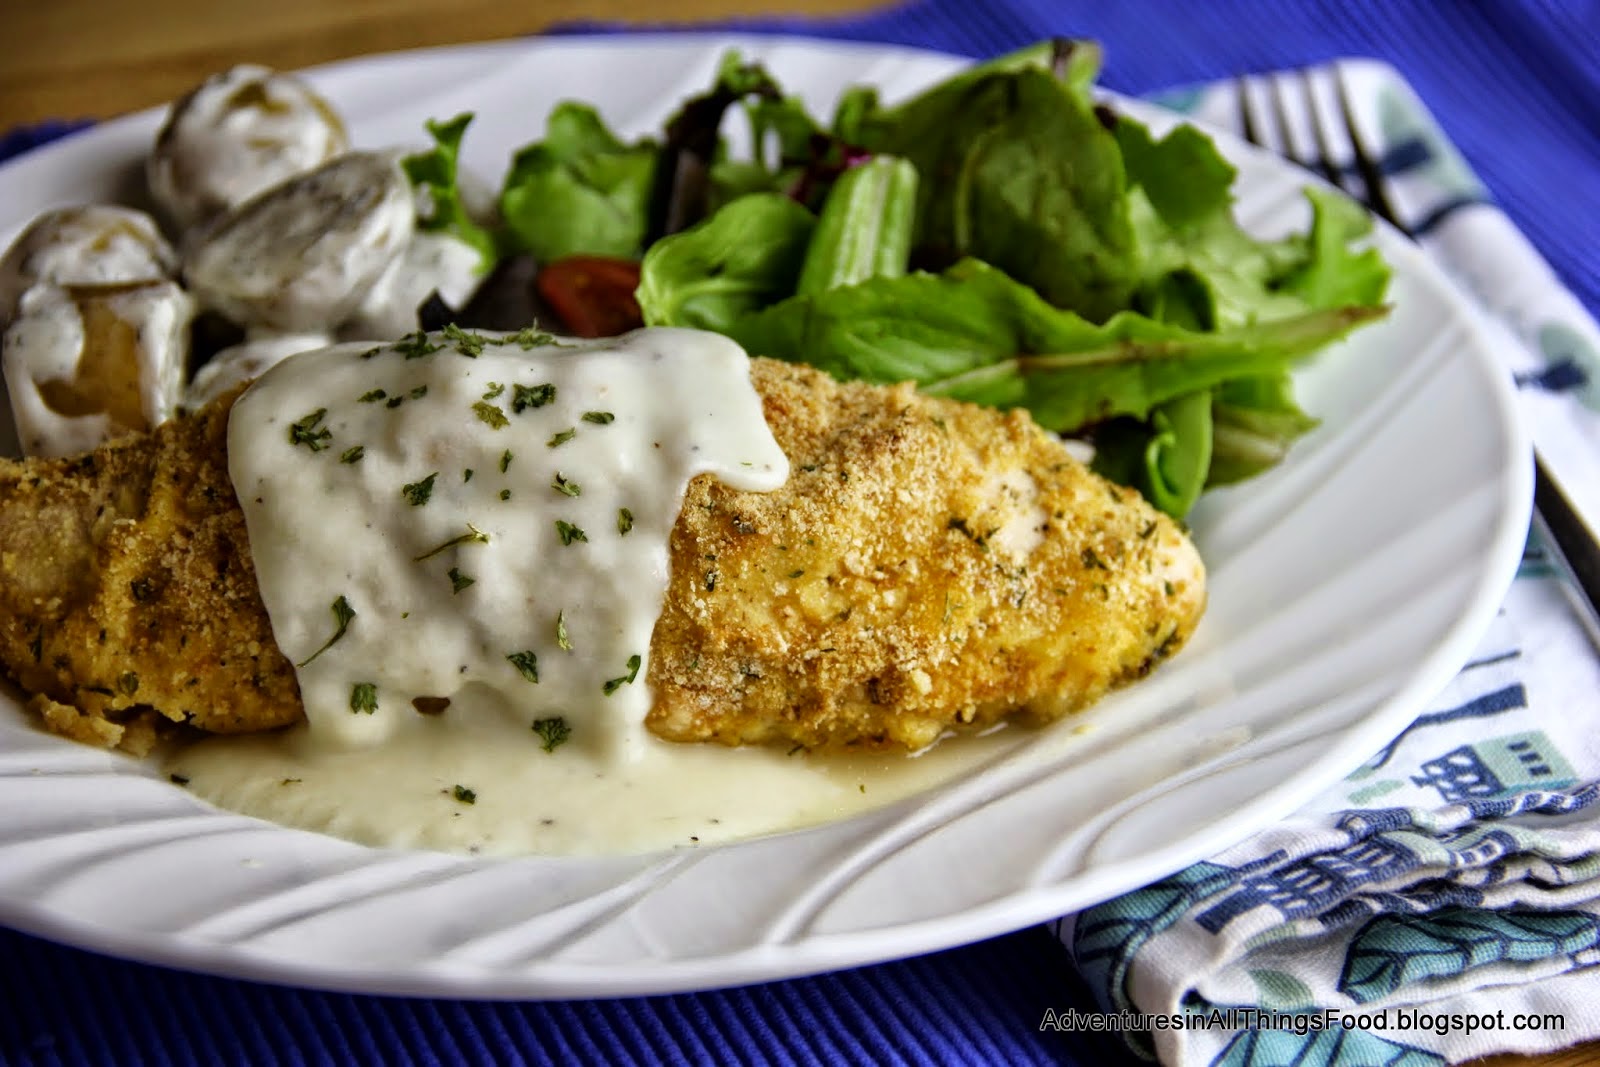 Featured Recipe: Chicken Cordon Bleu and Creamy Dill New Potatoes from Adventures in All Things Food #SecretRecipeClub #maindish #sidedish #recipe #chicken